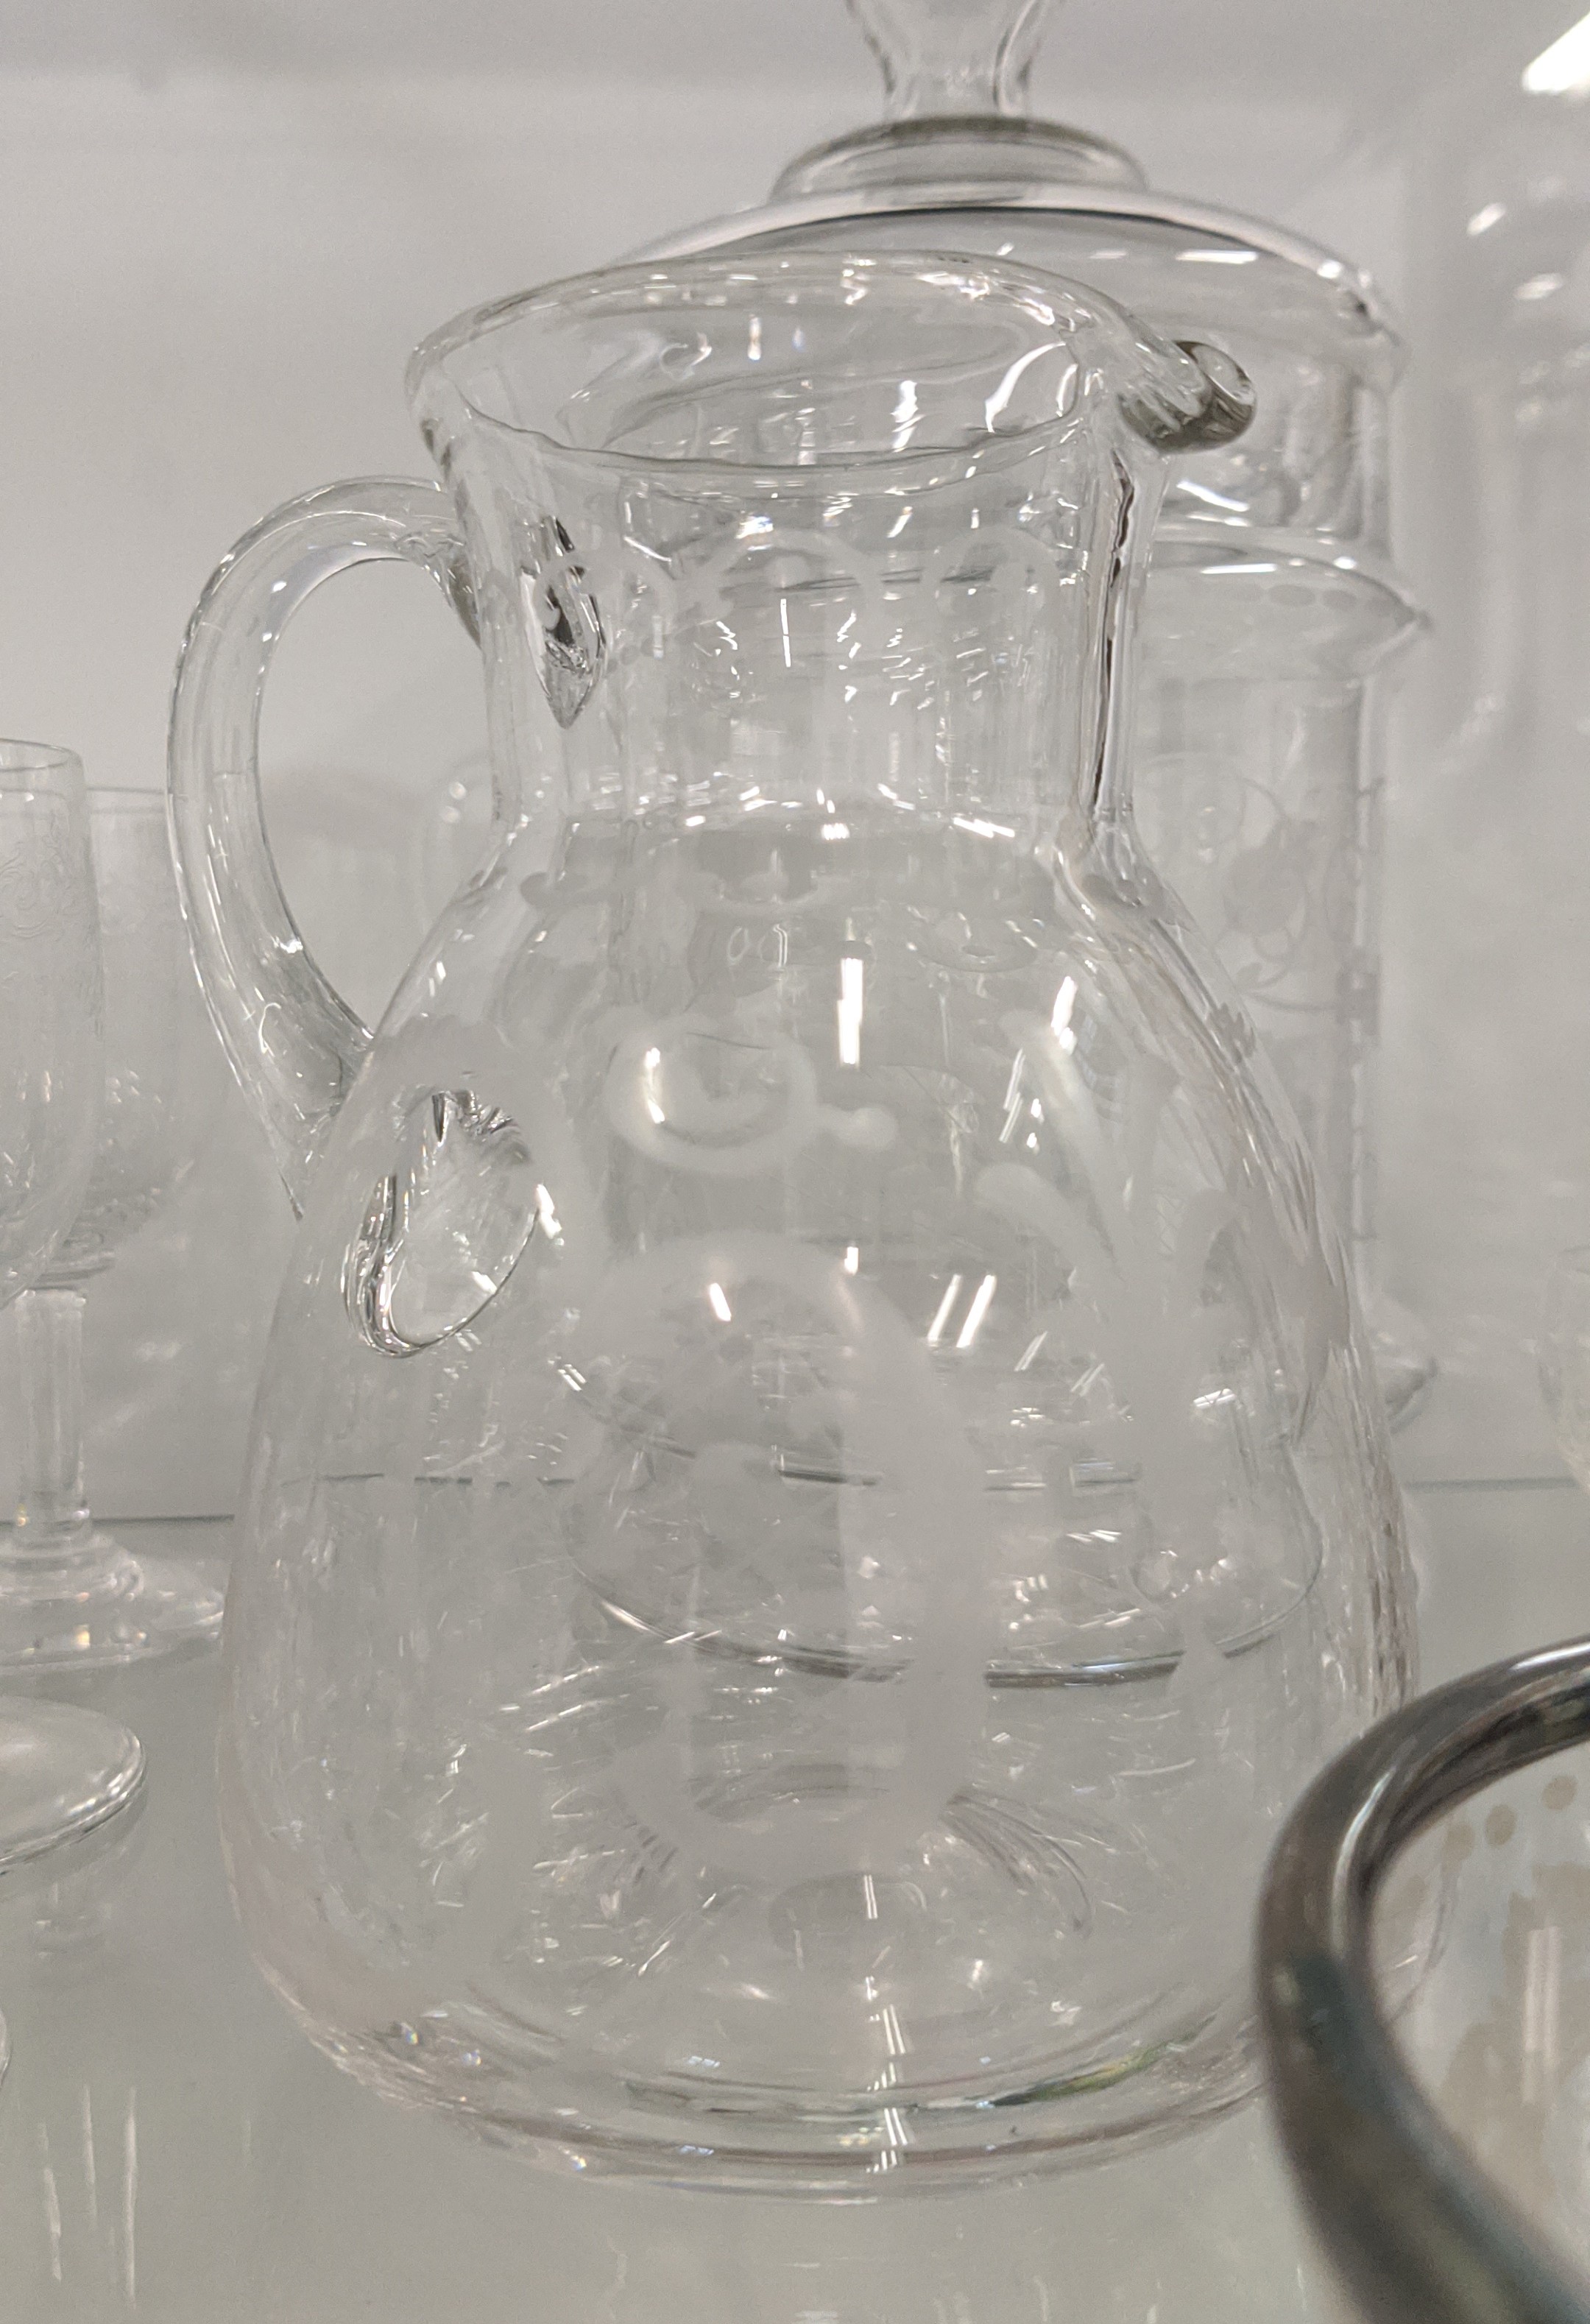 QUANTITY OF ENGRAVED GLASSWARE, including eight champagne flutes, decanter vodka glass set, eight - Image 8 of 9